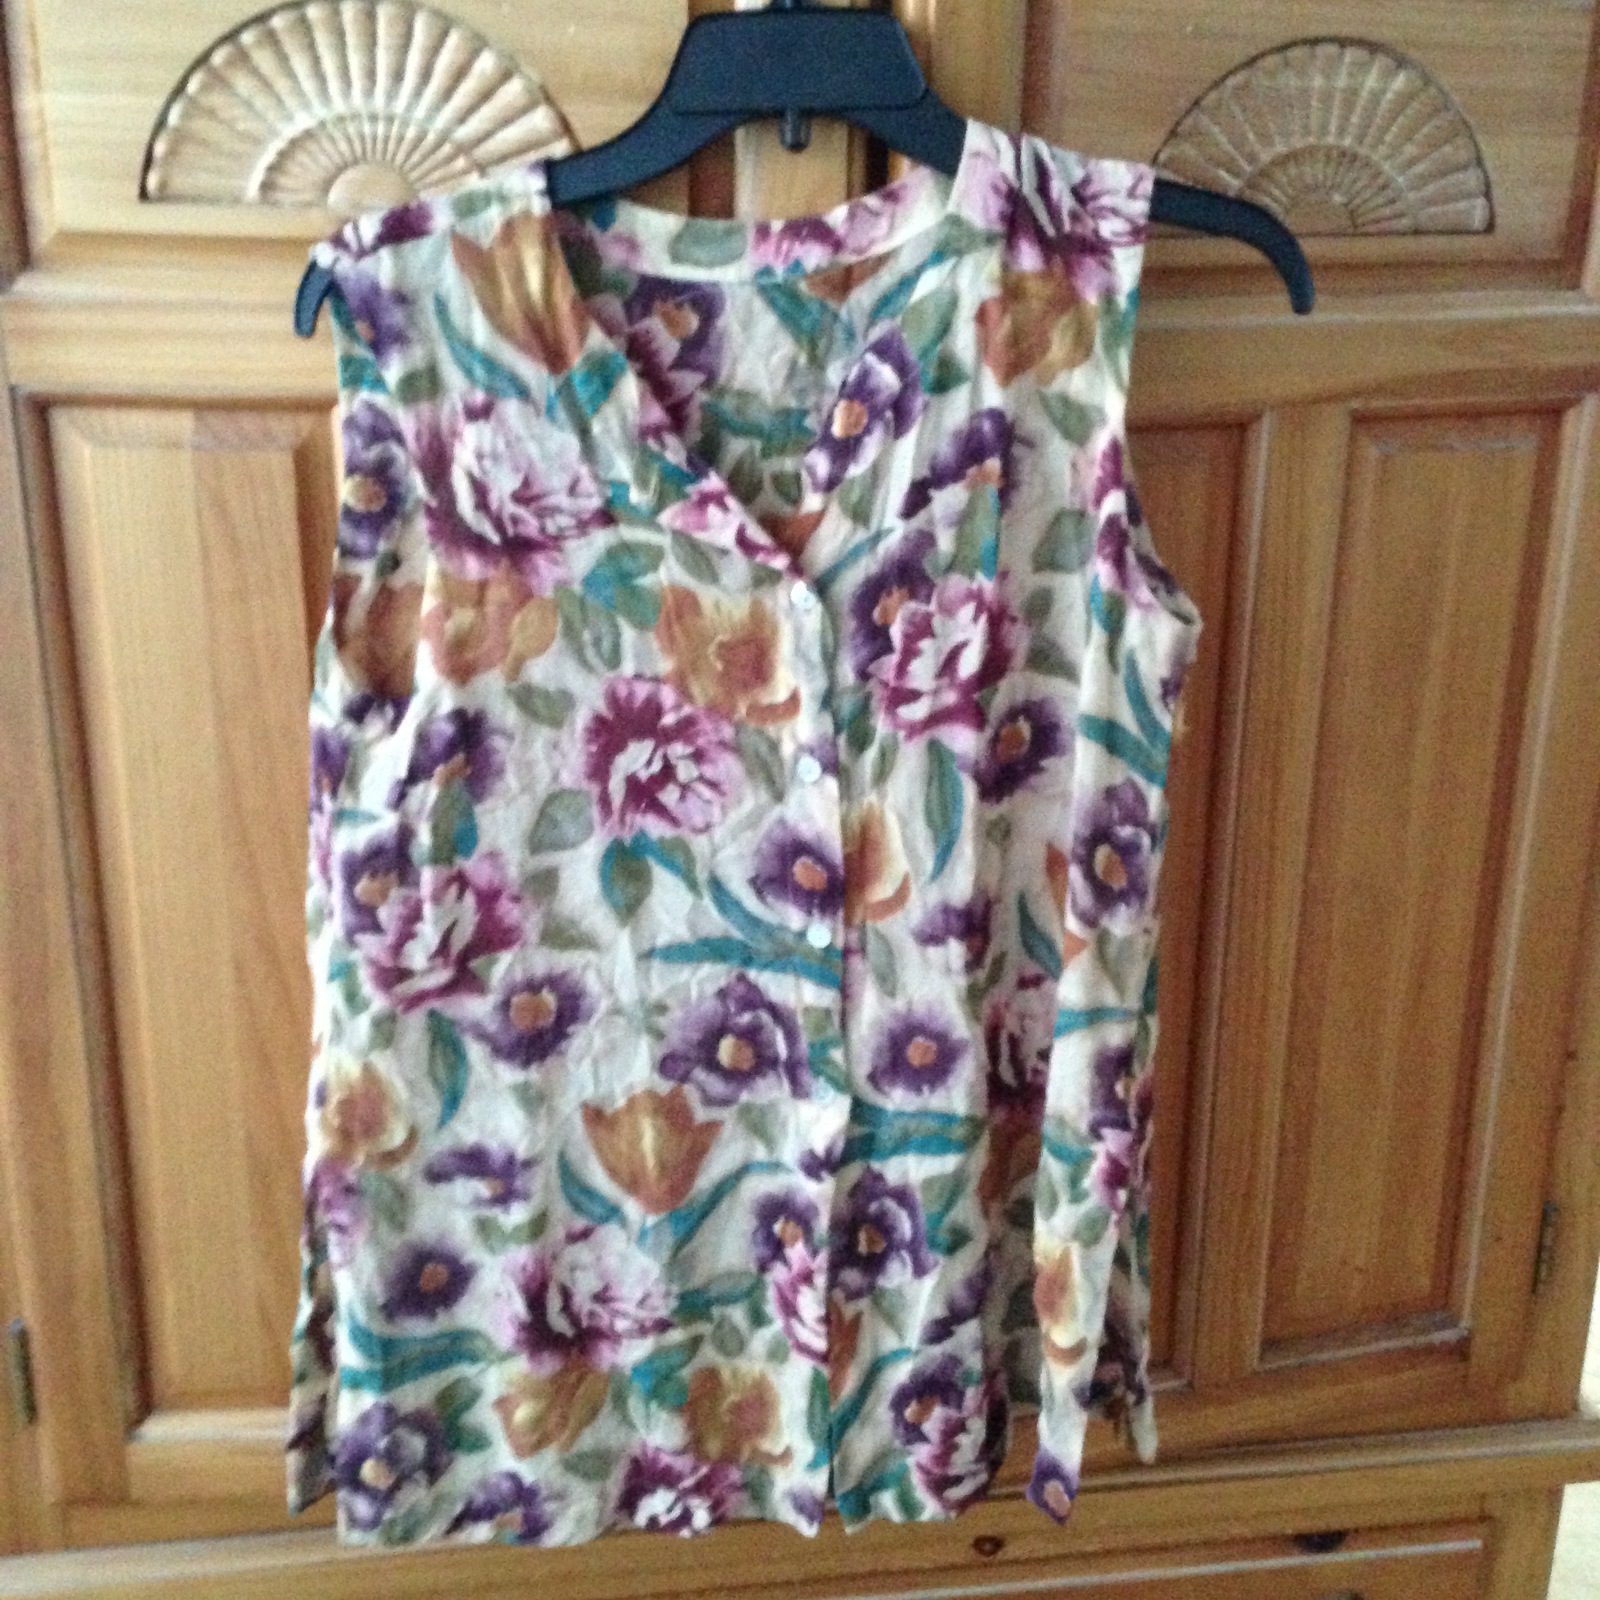 Primary image for  Women's Print Floral blouse sleeveless button front size medium